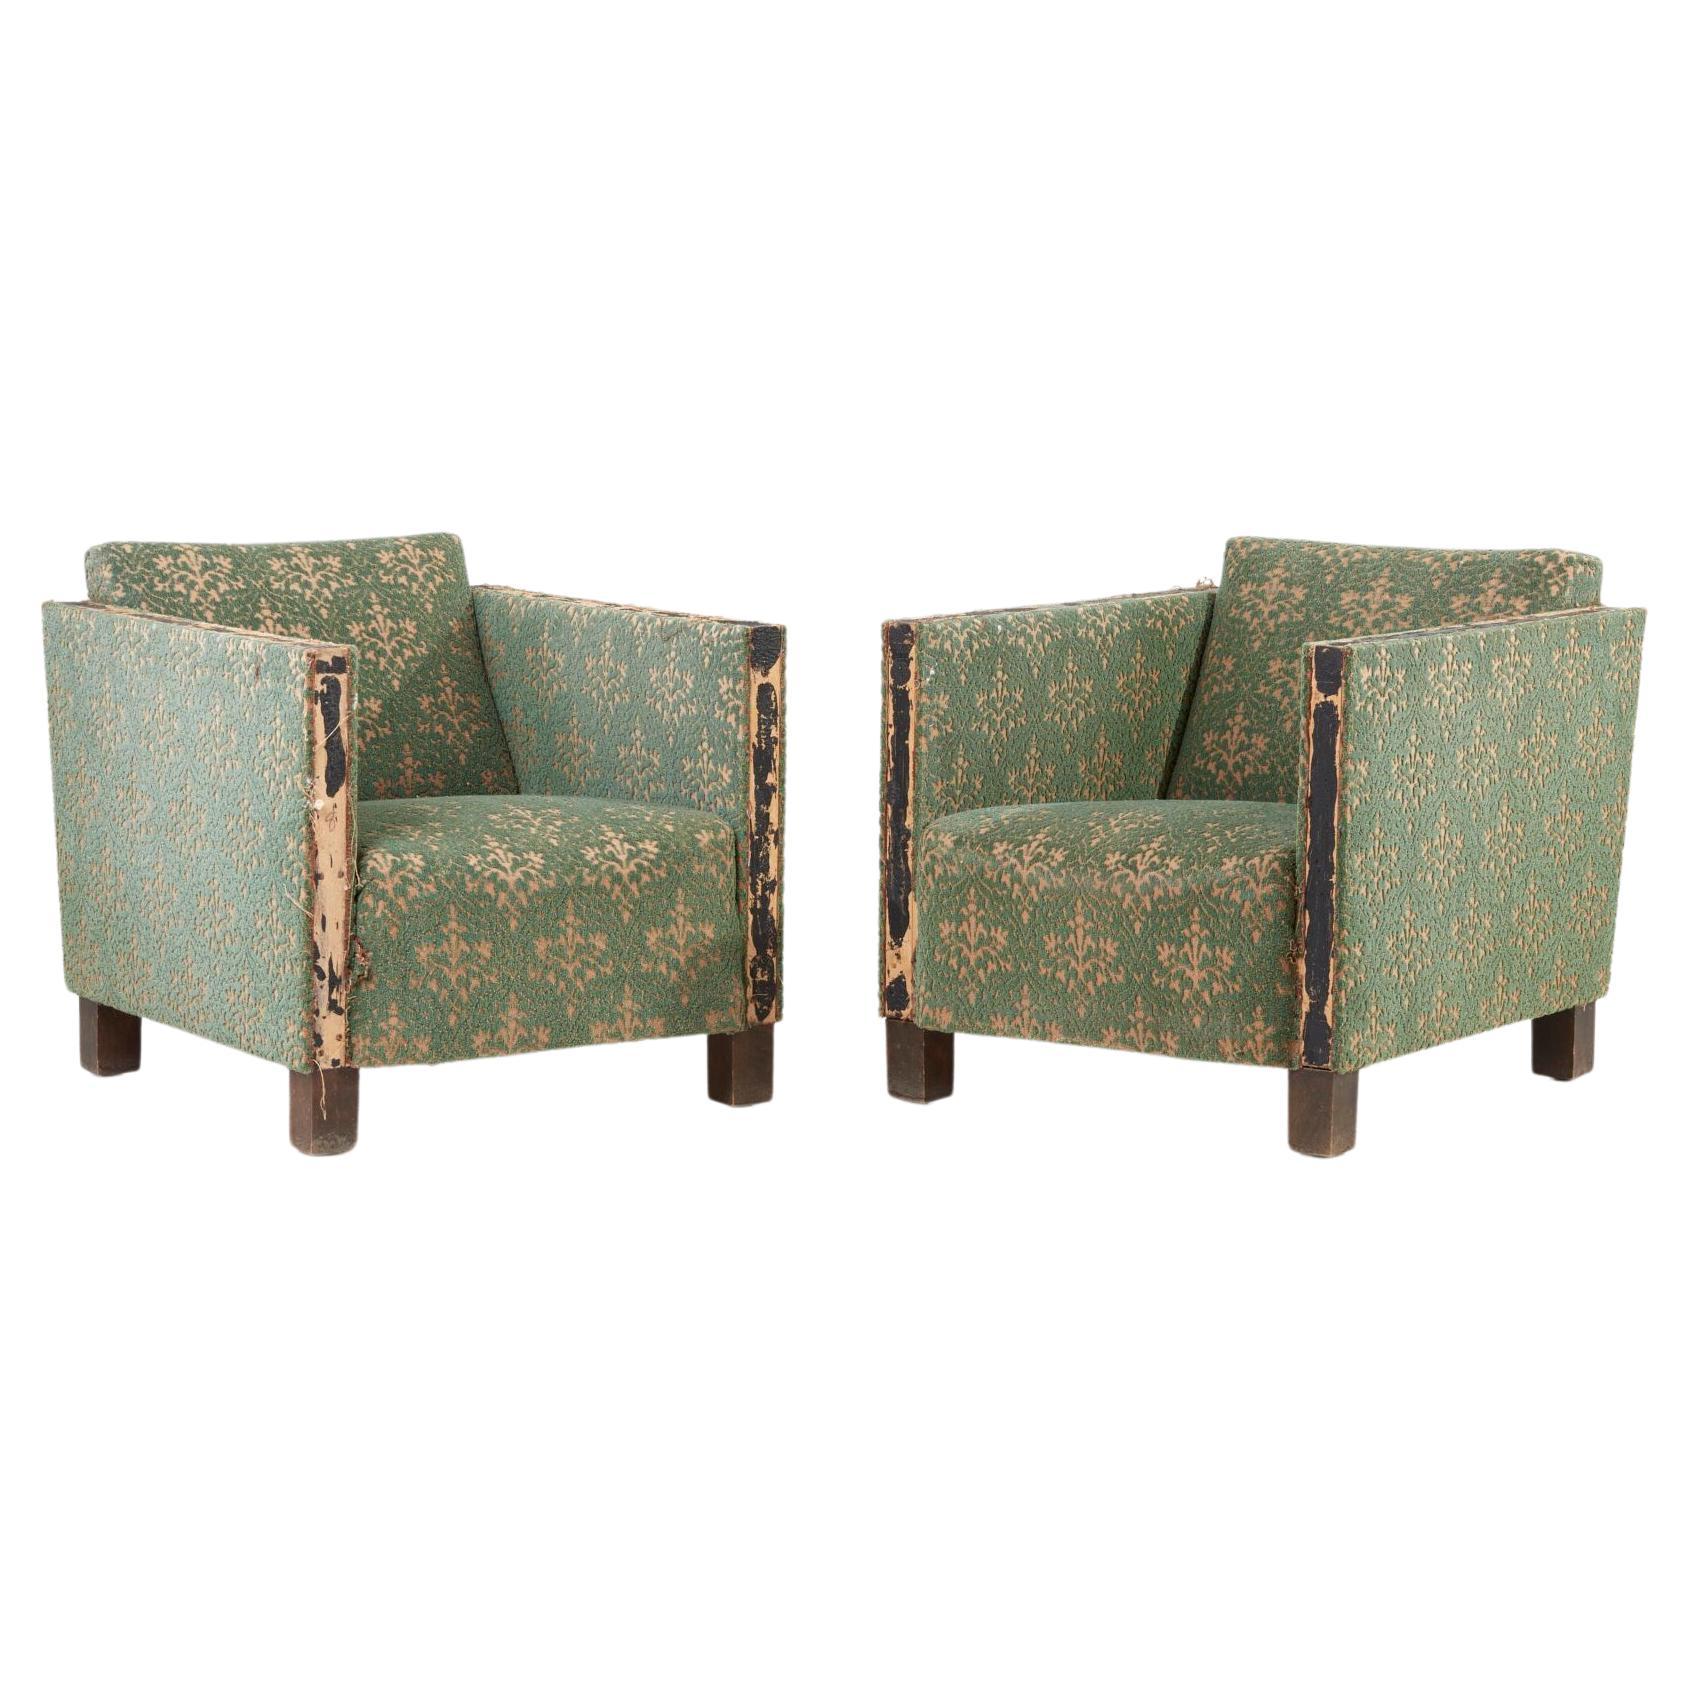 Pair of 1930s green Björn Trägårdh Lounge Chairs with ornaments, Sweden